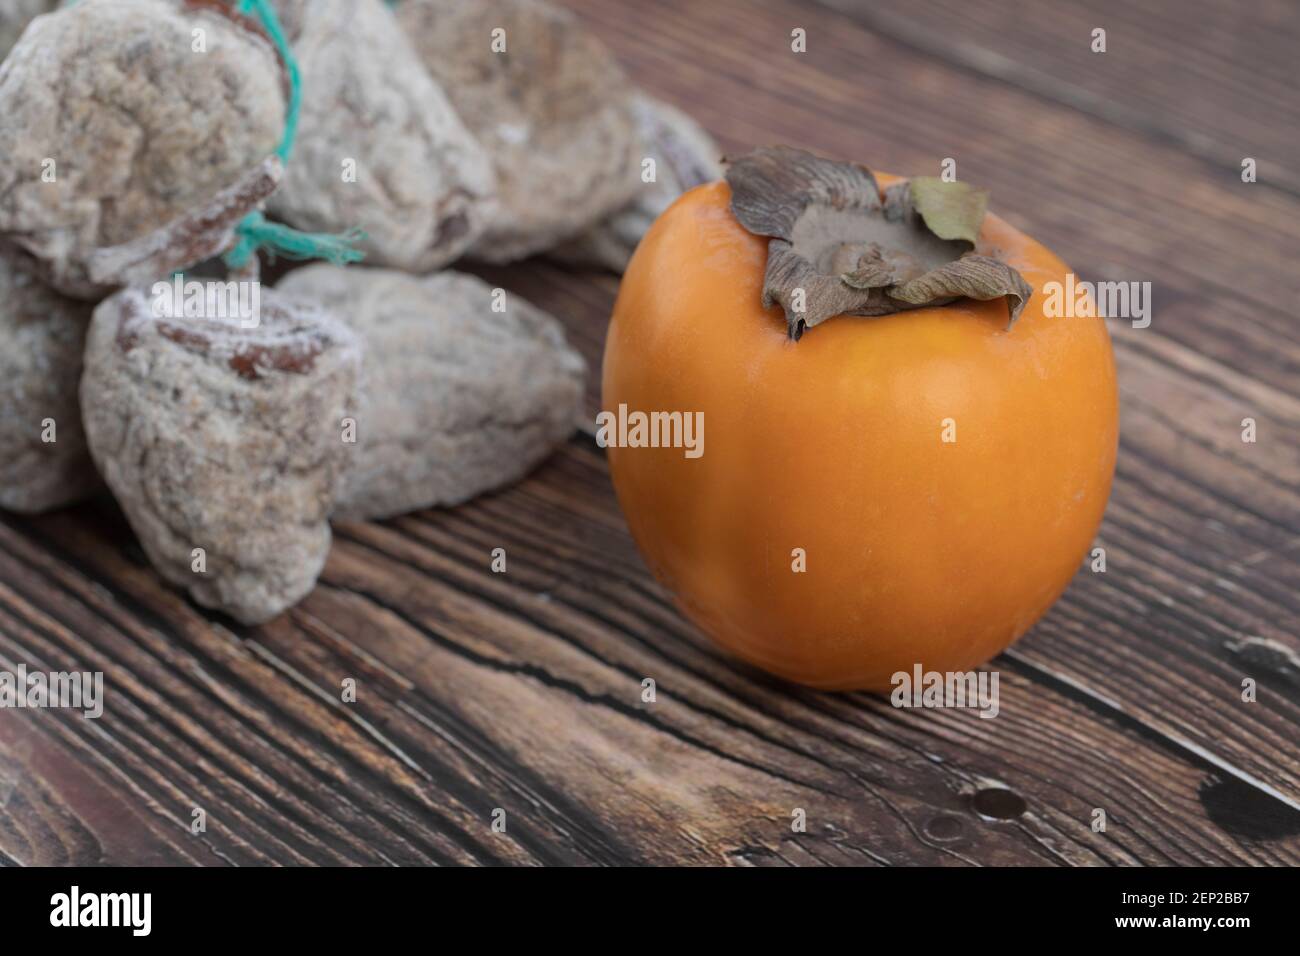 Tasty fuyu persimmon and dried persimmons on wooden surface Stock Photo